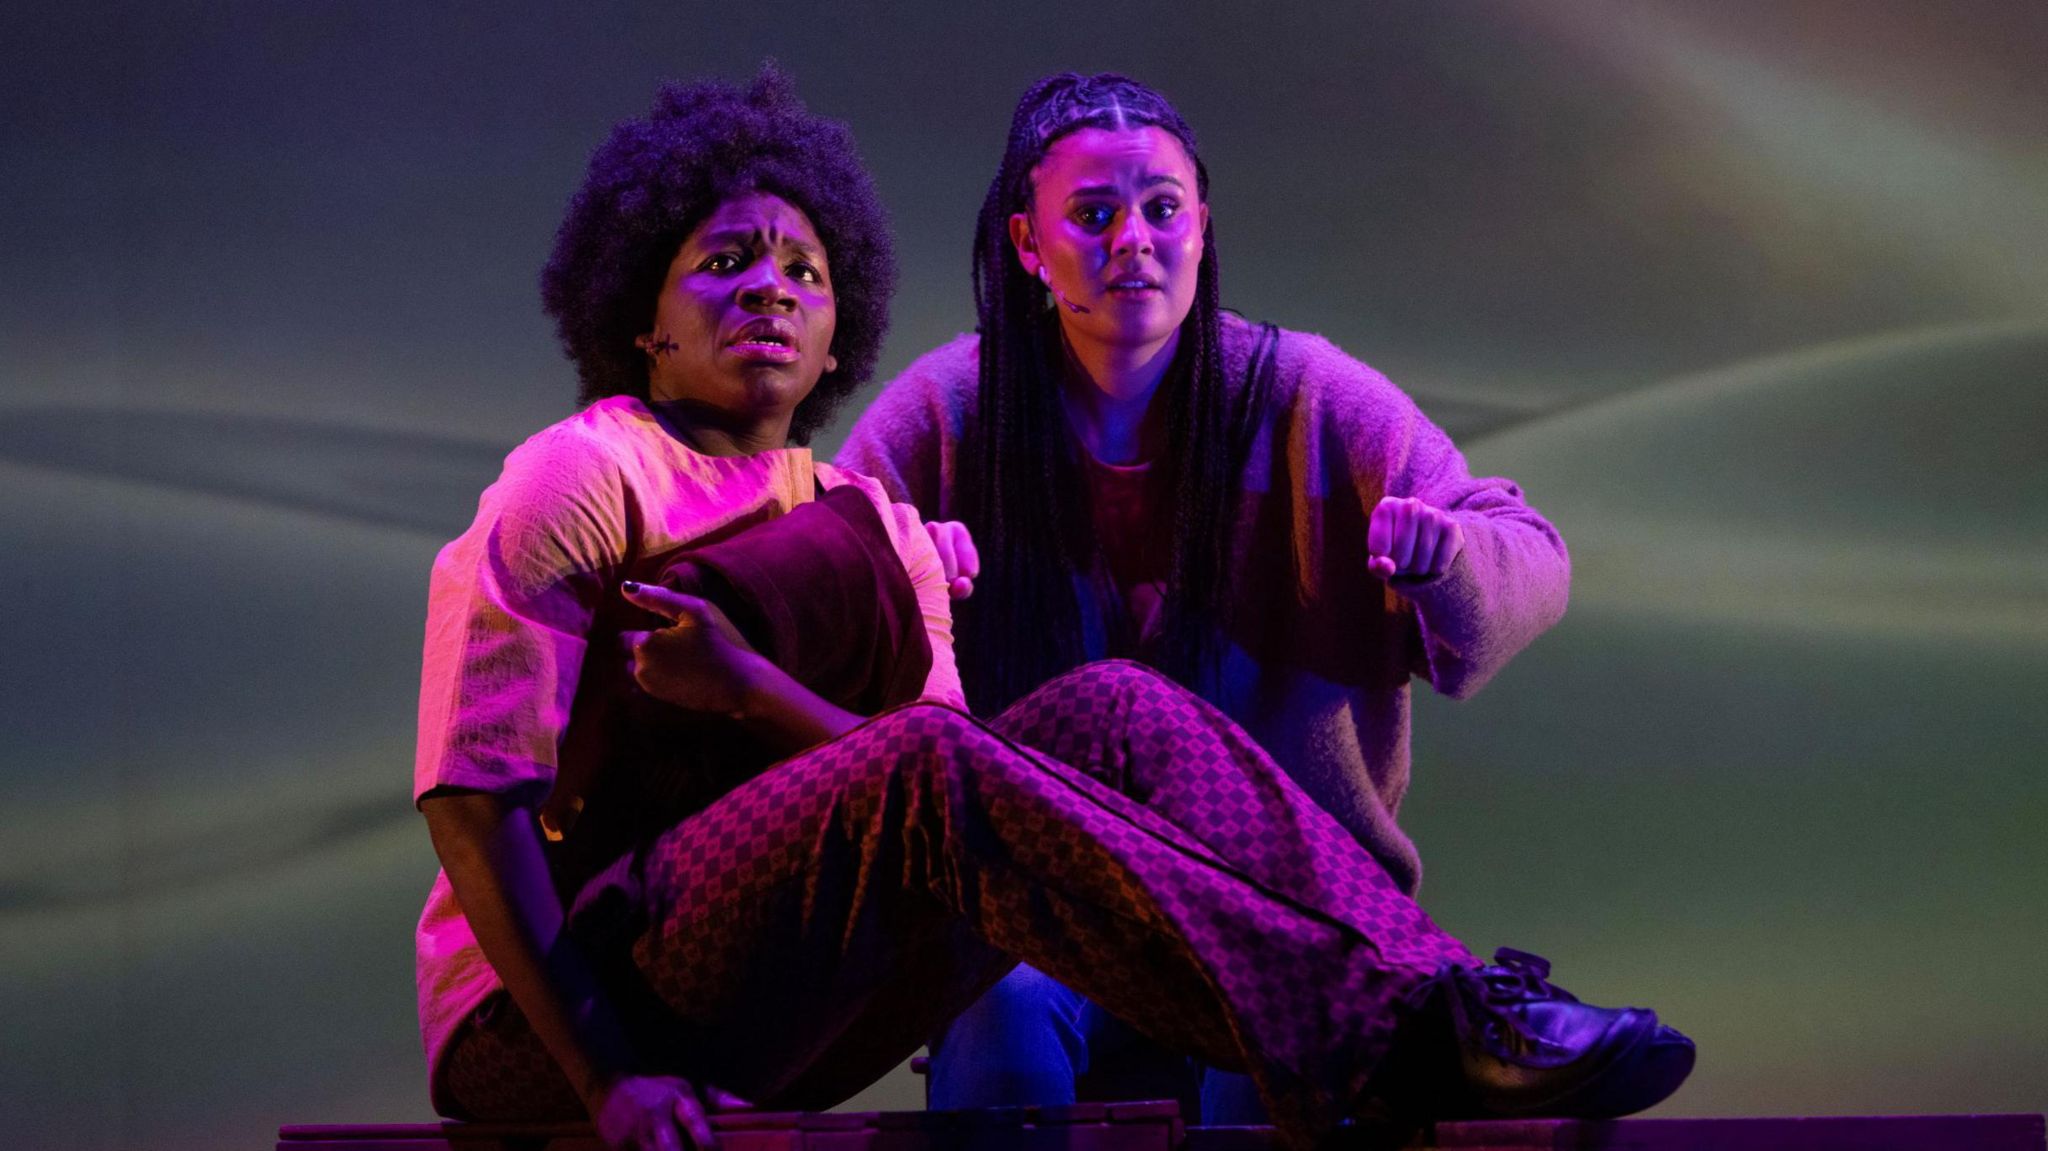 Apphia Campbell and a fellow actor on stage in purple lighting